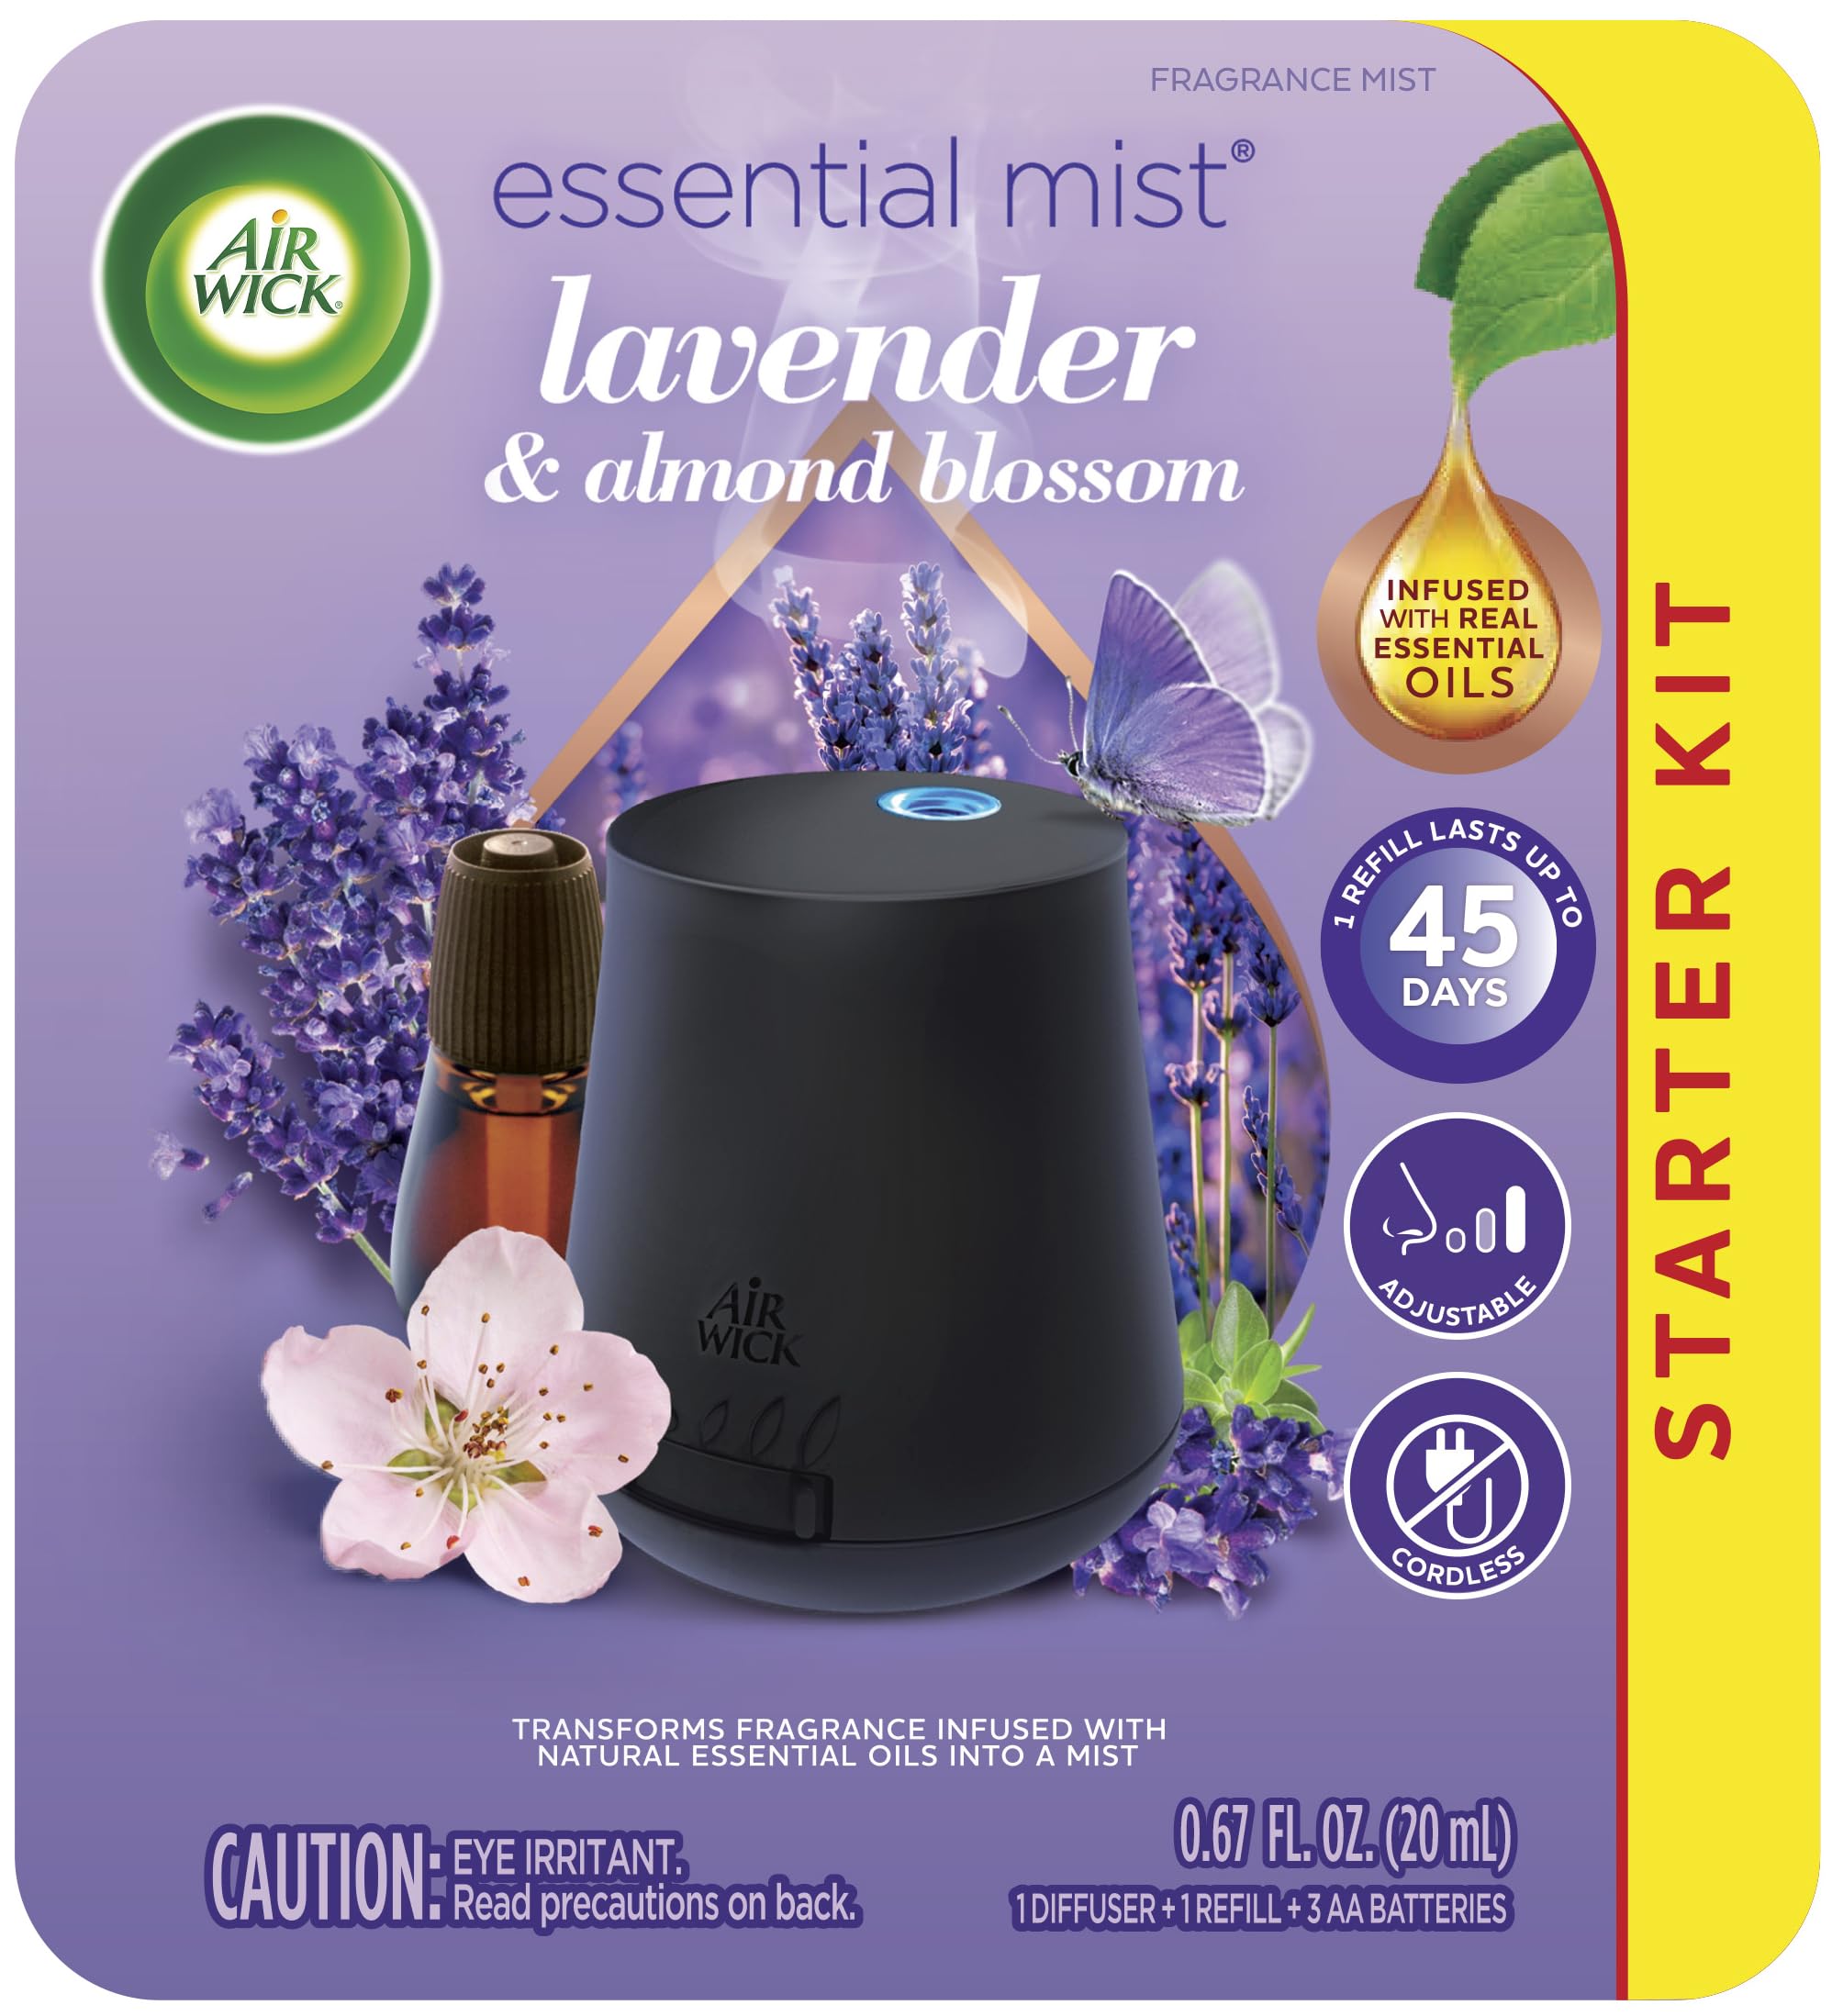 Air Wick Essential Oils Diffuser Mist Kit (Lavender & Almond Blossom) $6 + Free Shipping w/ Prime or on $35+